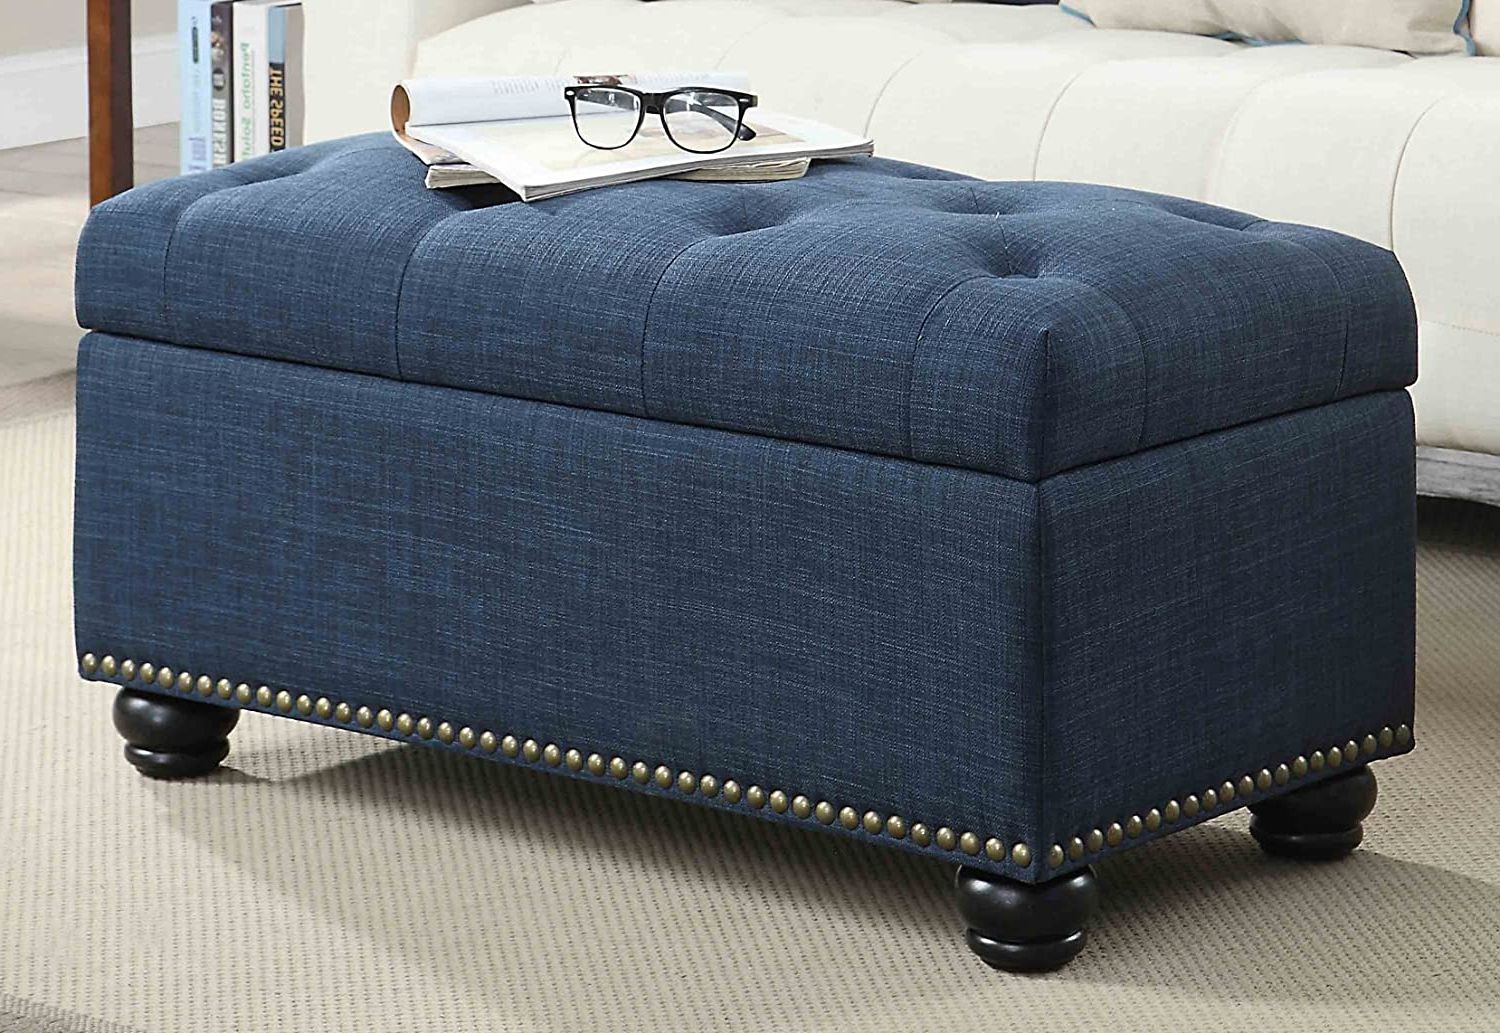 Well Liked Convenience Concepts Designs4comfort 7th Avenue Storage Ottoman, Blue Regarding Fabric Storage Ottomans (View 5 of 10)